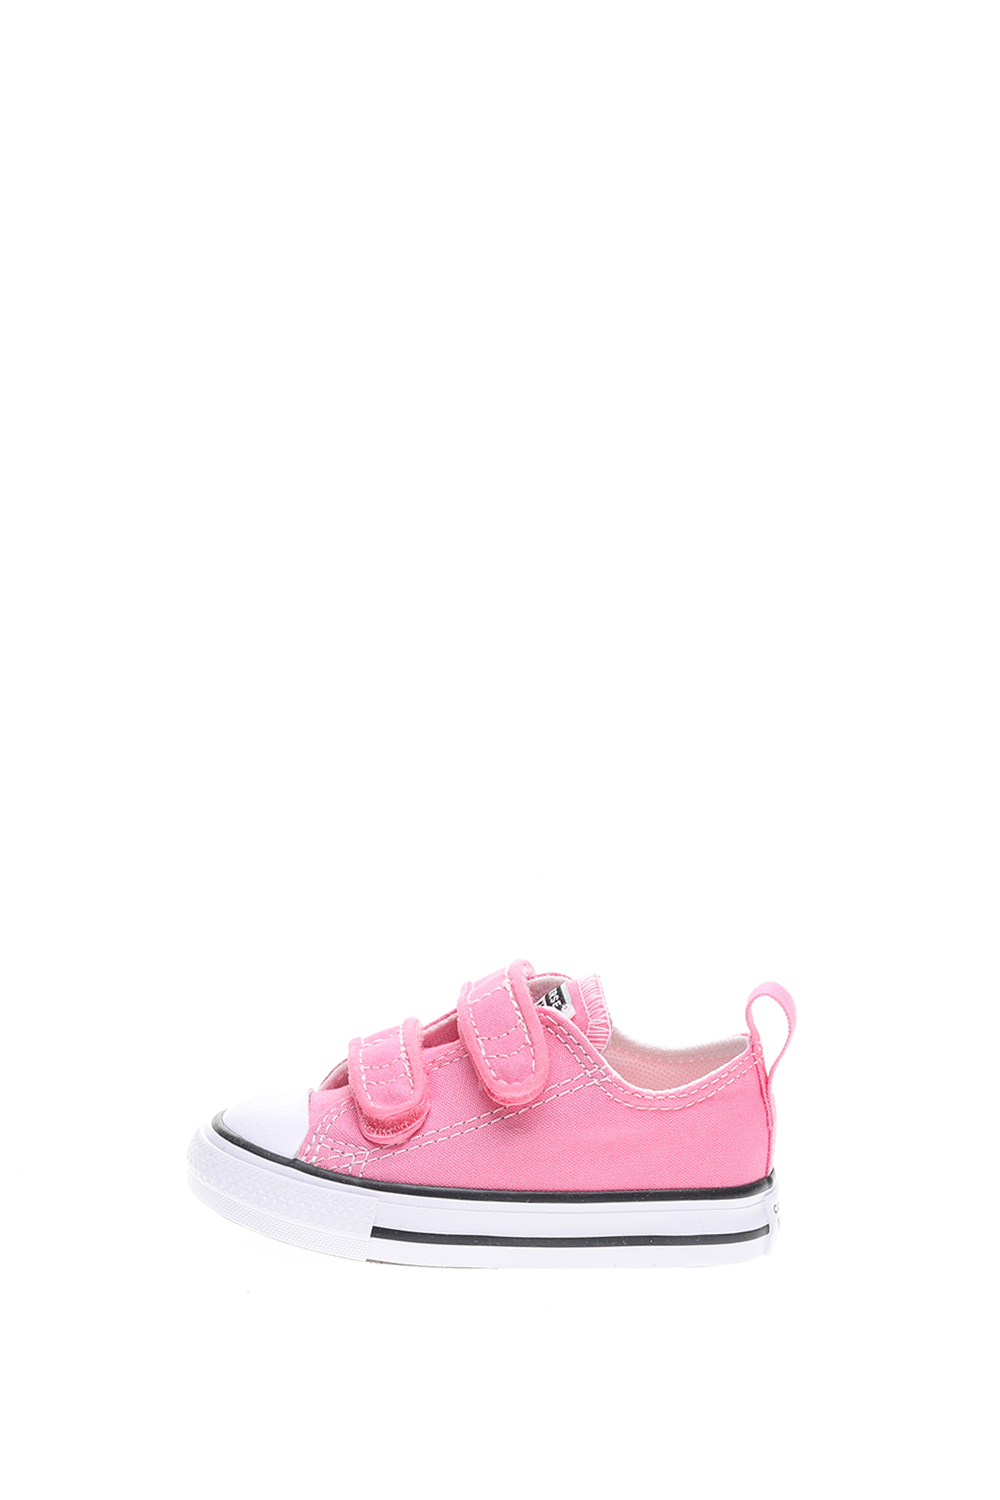 CONVERSE - Βρεφικά sneakers CONVERSE Chuck Taylor All Star 2V ροζ Παιδικά/Baby/Παπούτσια/Αθλητικά